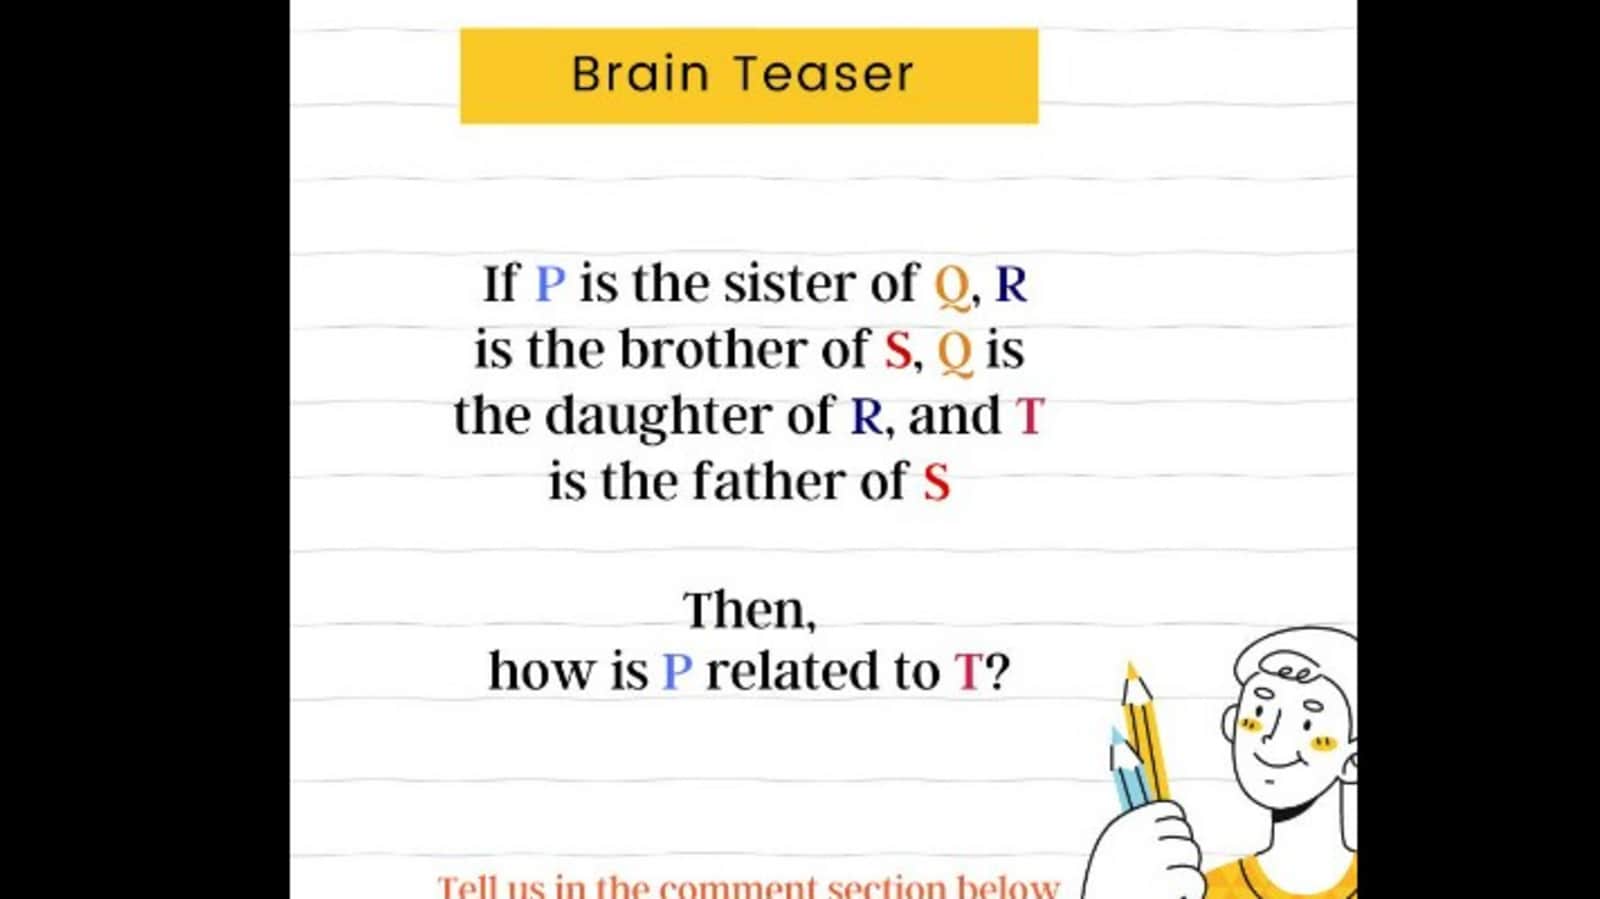 Viral brain teaser: Can you find the relationship between P and T in this mind-bending puzzle?